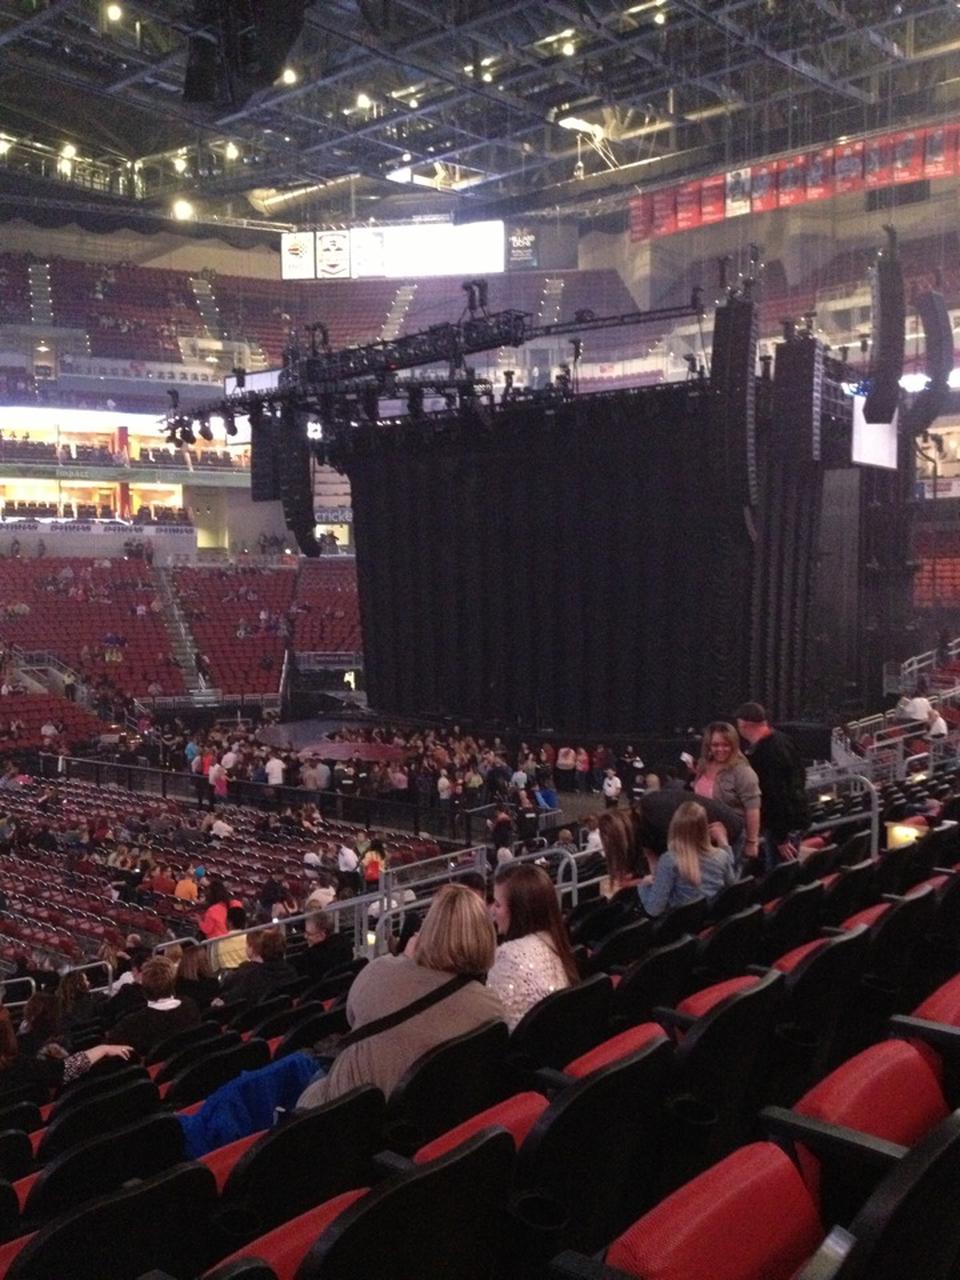 section 106, row p seat view  for concert - kfc yum! center